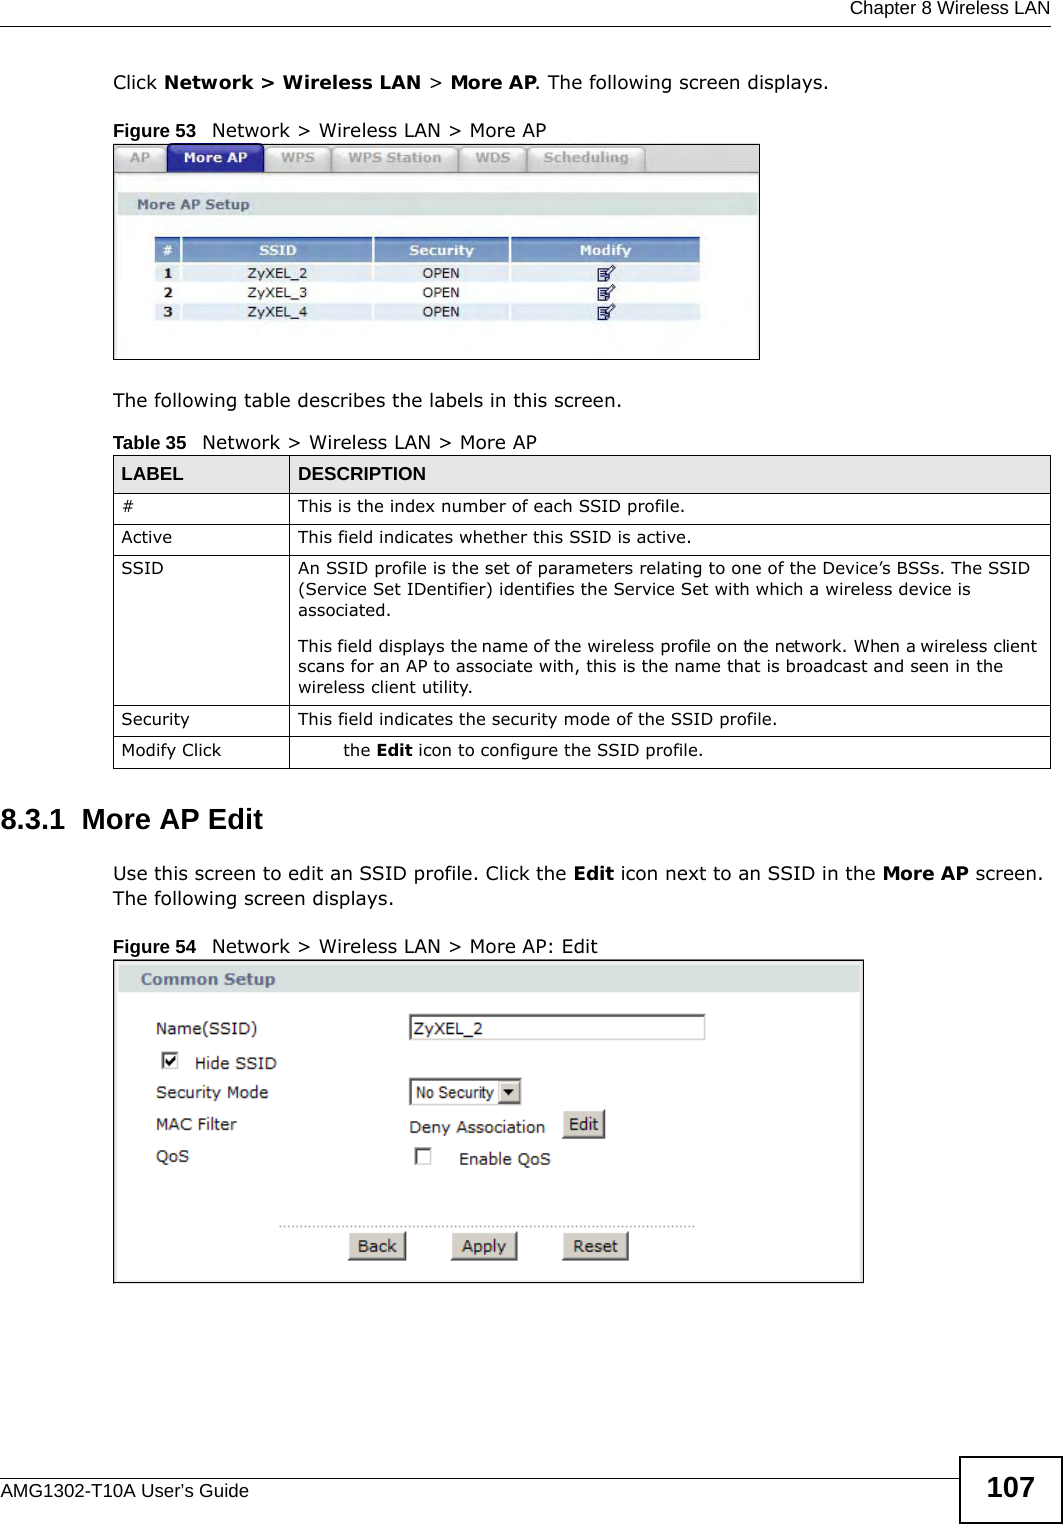  Chapter 8 Wireless LANAMG1302-T10A User’s Guide 107Click Network &gt; Wireless LAN &gt; More AP. The following screen displays.Figure 53   Network &gt; Wireless LAN &gt; More APThe following table describes the labels in this screen.8.3.1  More AP EditUse this screen to edit an SSID profile. Click the Edit icon next to an SSID in the More AP screen. The following screen displays.Figure 54   Network &gt; Wireless LAN &gt; More AP: EditTable 35   Network &gt; Wireless LAN &gt; More APLABEL DESCRIPTION# This is the index number of each SSID profile. Active This field indicates whether this SSID is active. SSID An SSID profile is the set of parameters relating to one of the Device’s BSSs. The SSID (Service Set IDentifier) identifies the Service Set with which a wireless device is associated. This field displays the name of the wireless profile on the network. When a wireless client scans for an AP to associate with, this is the name that is broadcast and seen in the wireless client utility.Security This field indicates the security mode of the SSID profile.Modify Click  the Edit icon to configure the SSID profile.